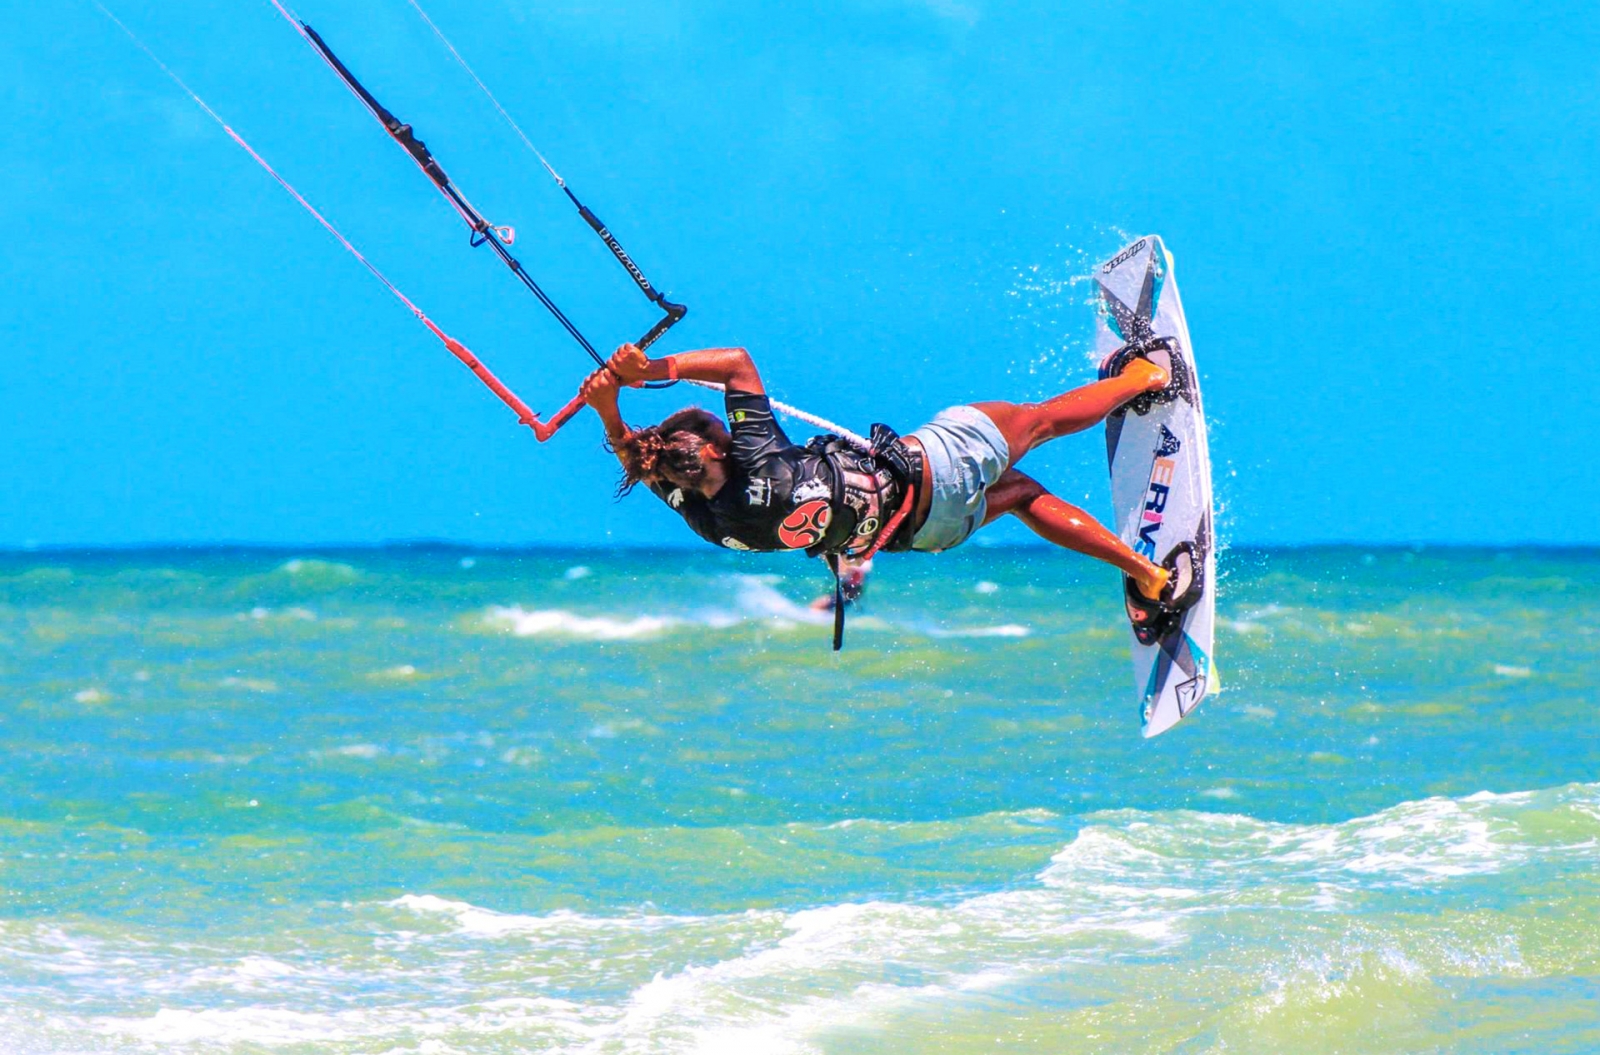 Kitesurf and Windsurf Section at Praia do Forte in Cabo Frio 